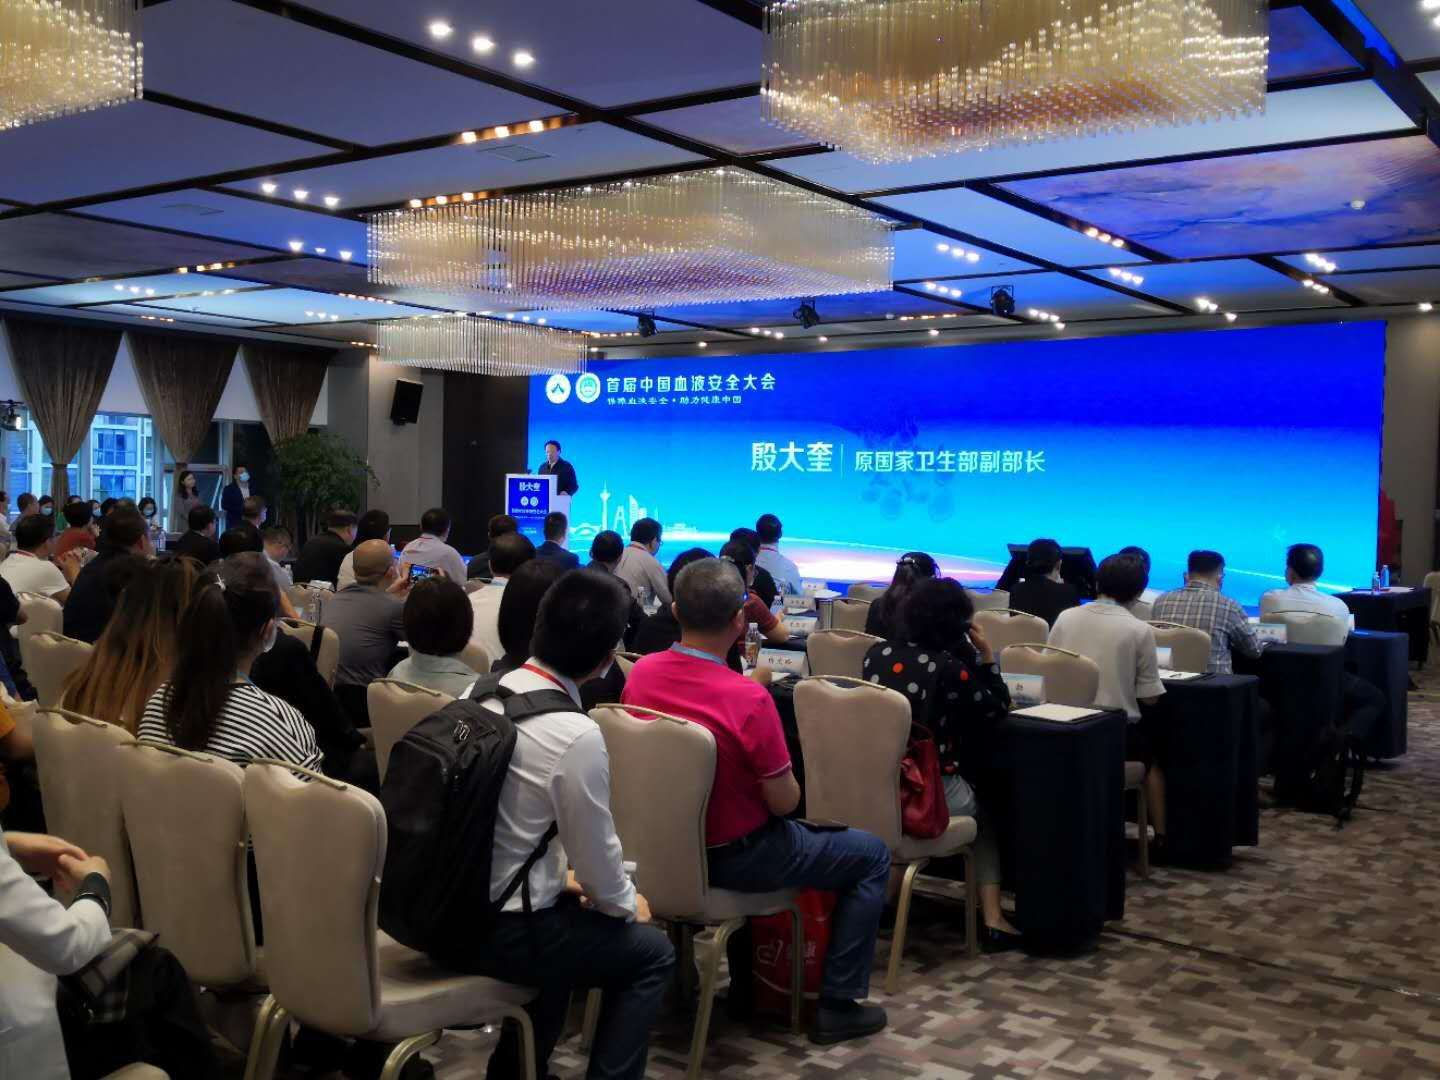 【Conference News】BACME Biotech attends the 1st China Blood Safety Conference